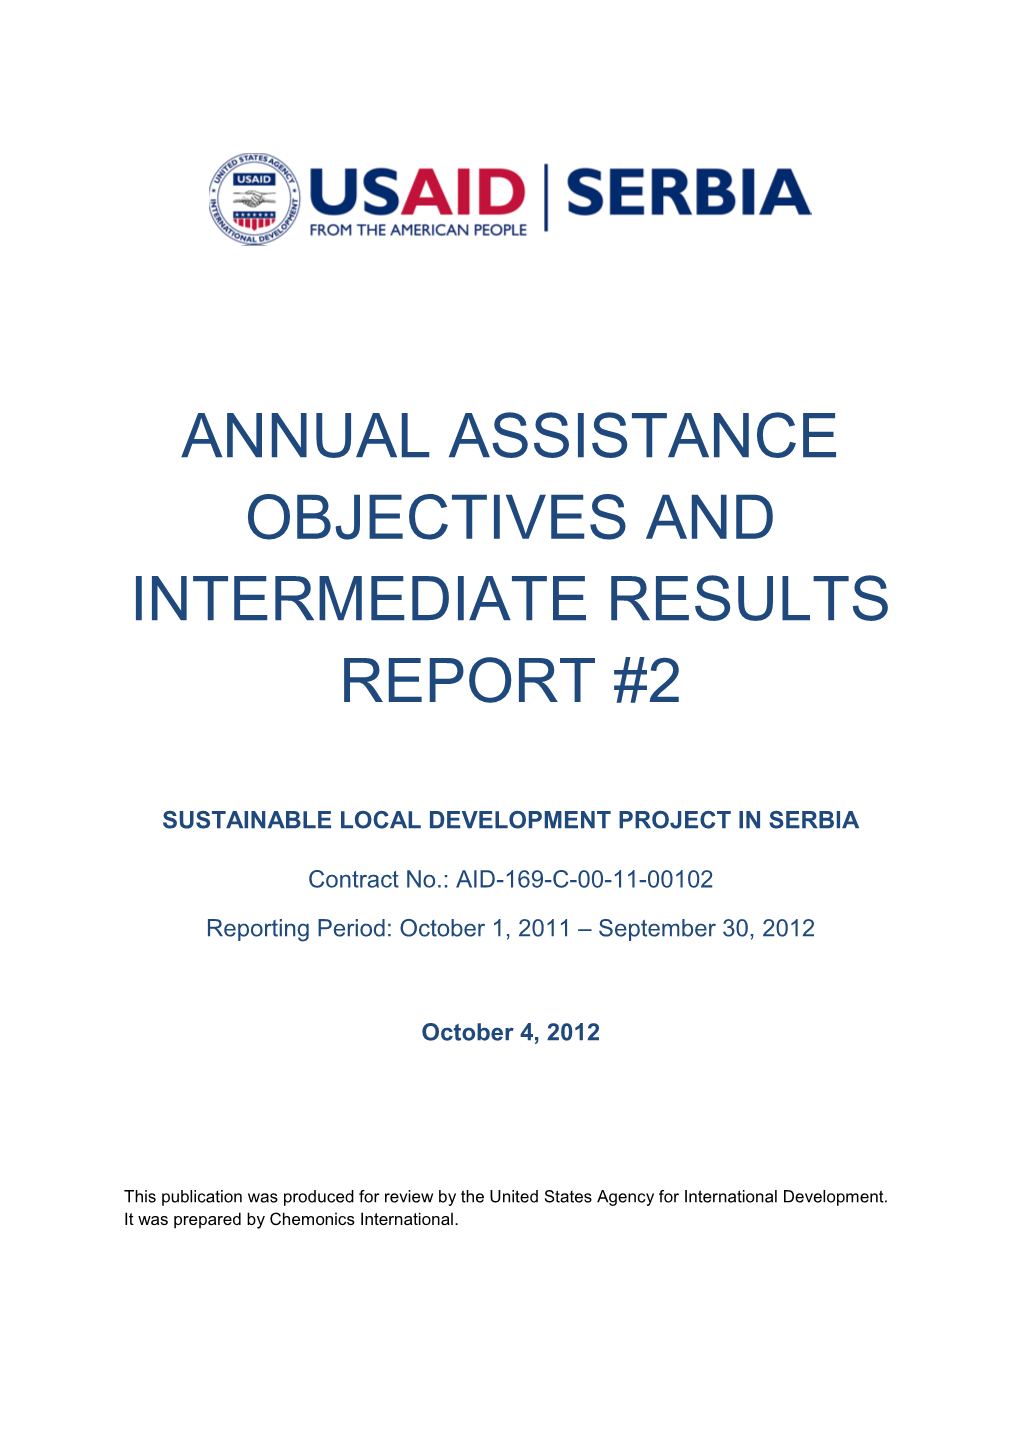 Annual Assistance Objectives and Intermediate Results Report #2